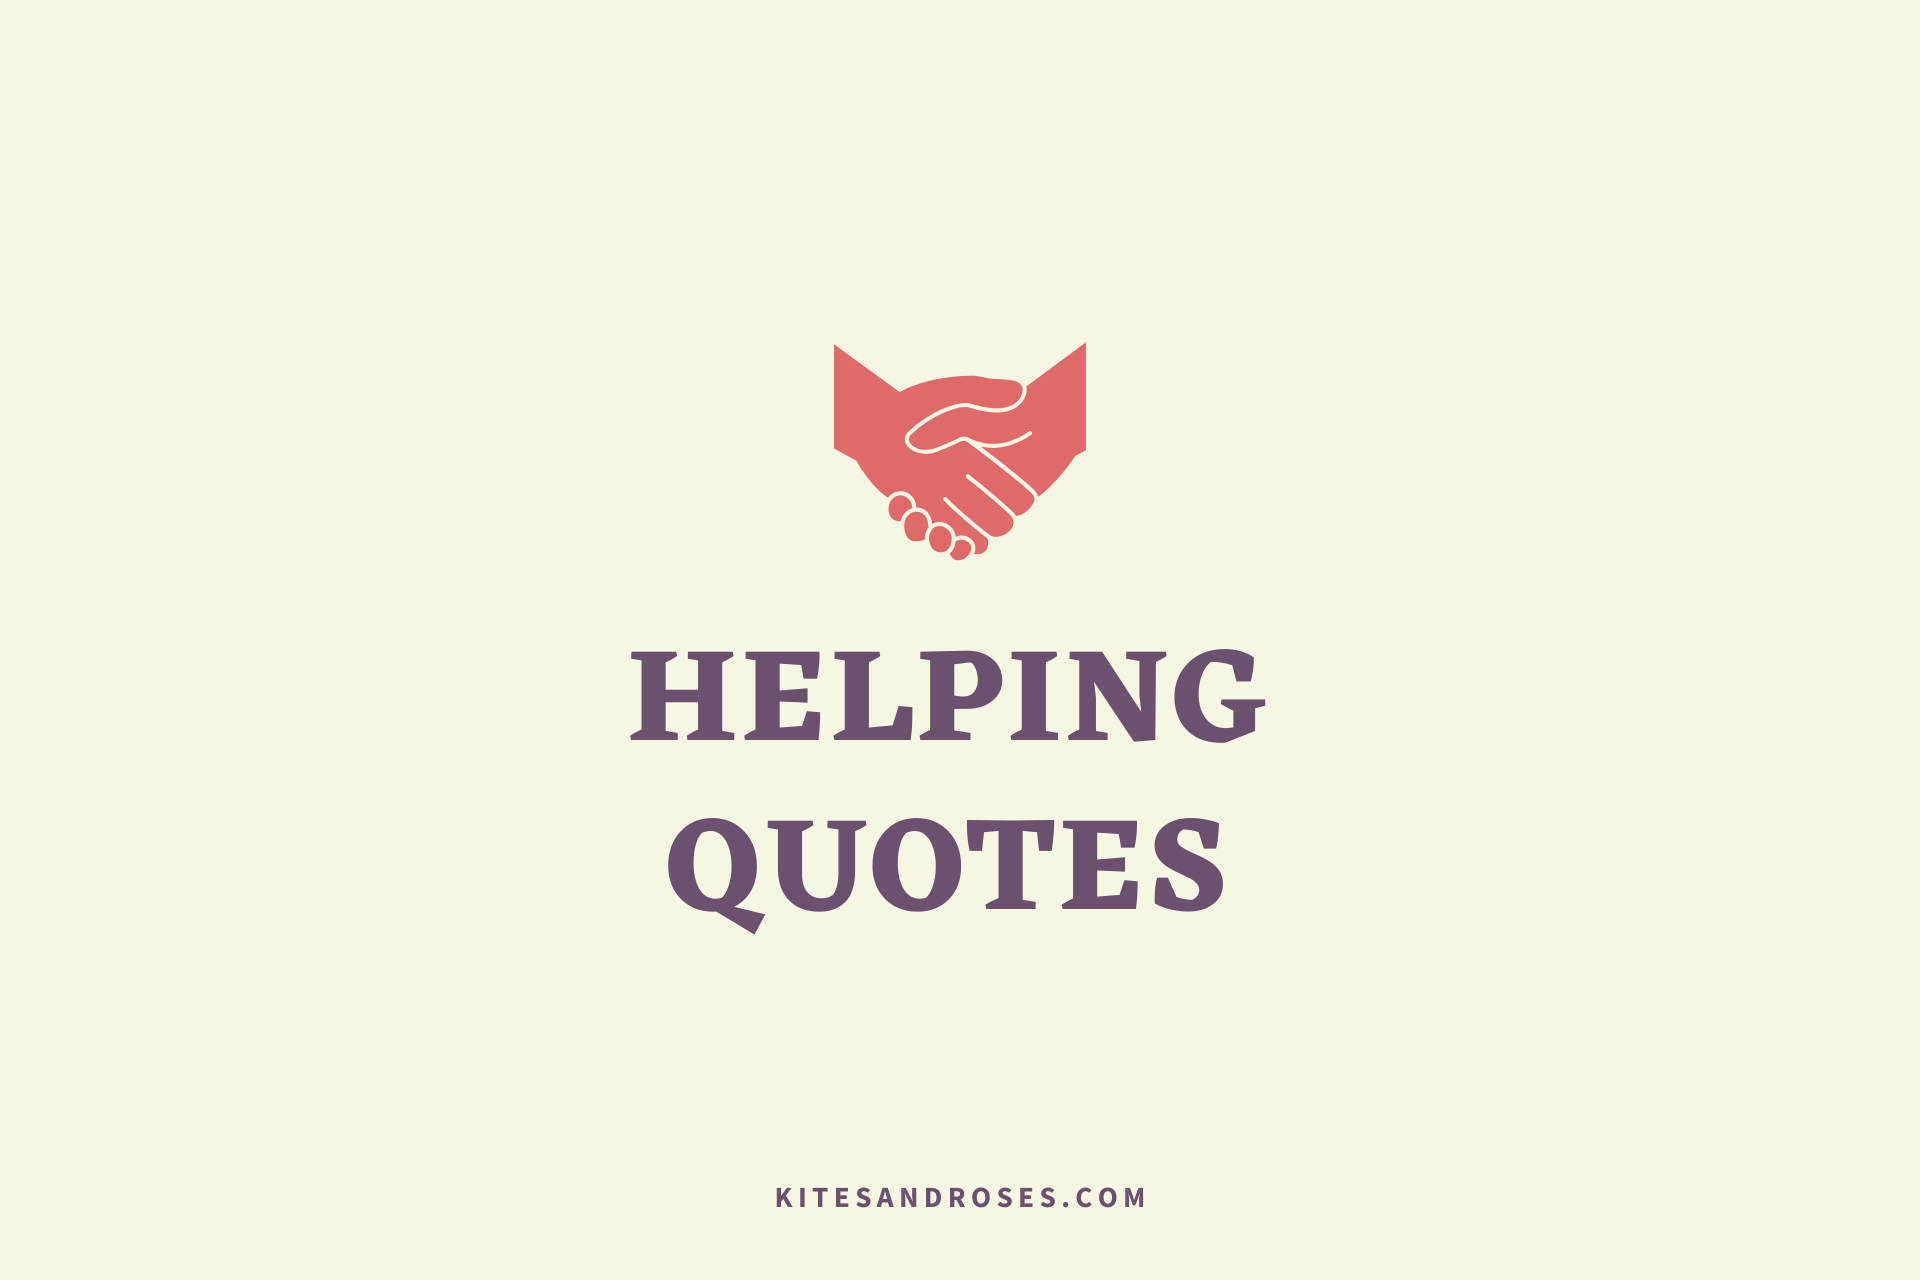 Helping Others Quotes 